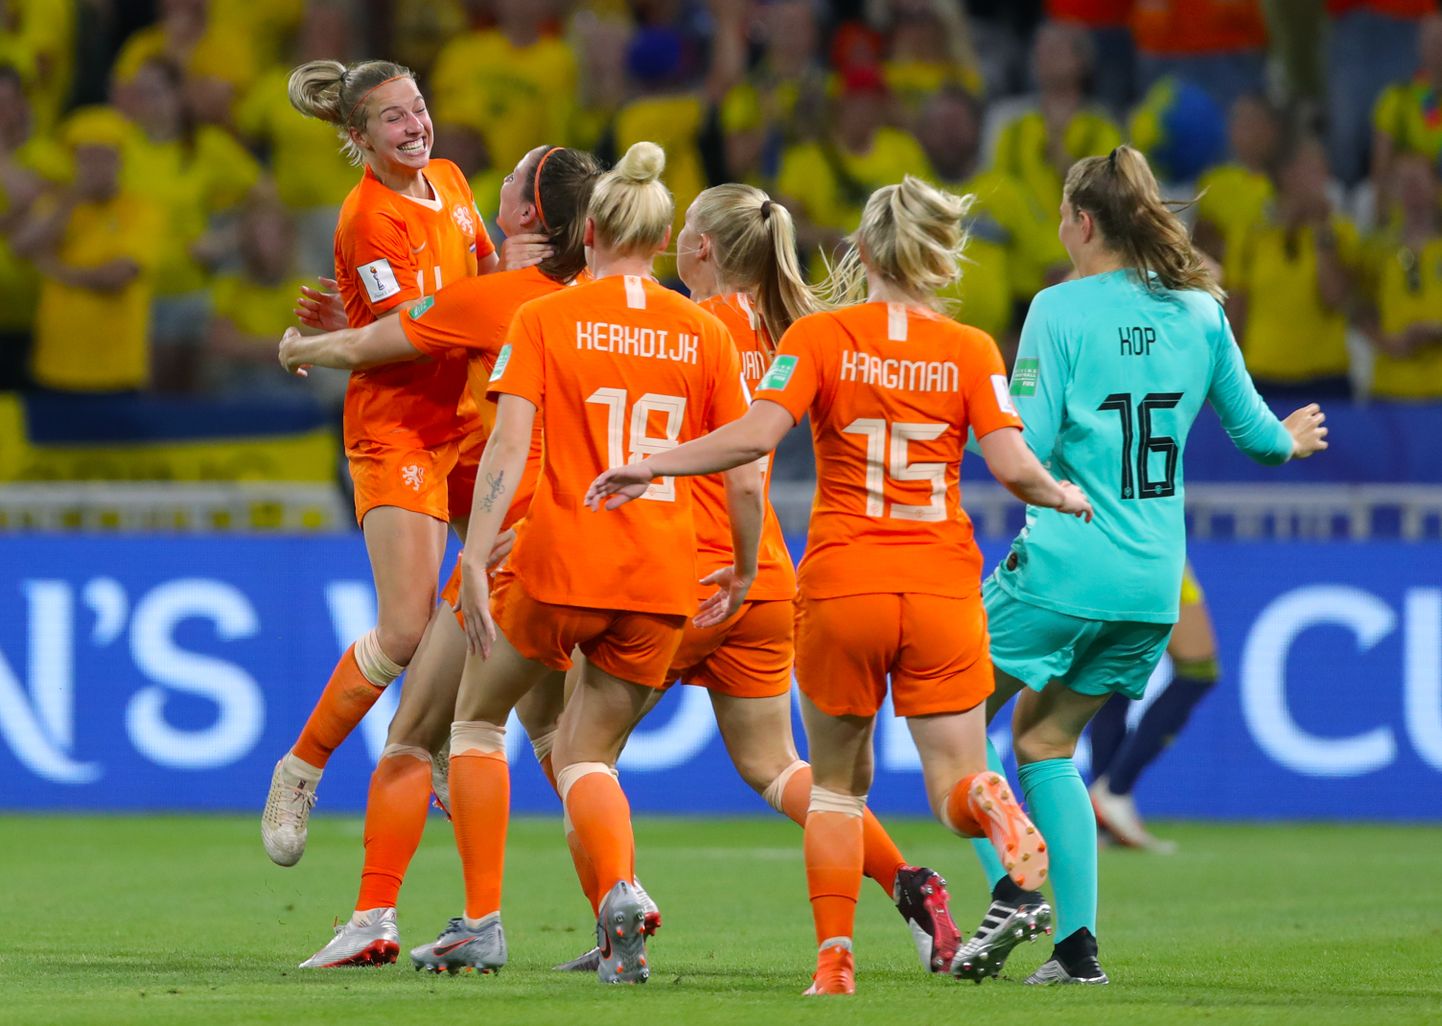 Netherland players celebrate after the final whistle